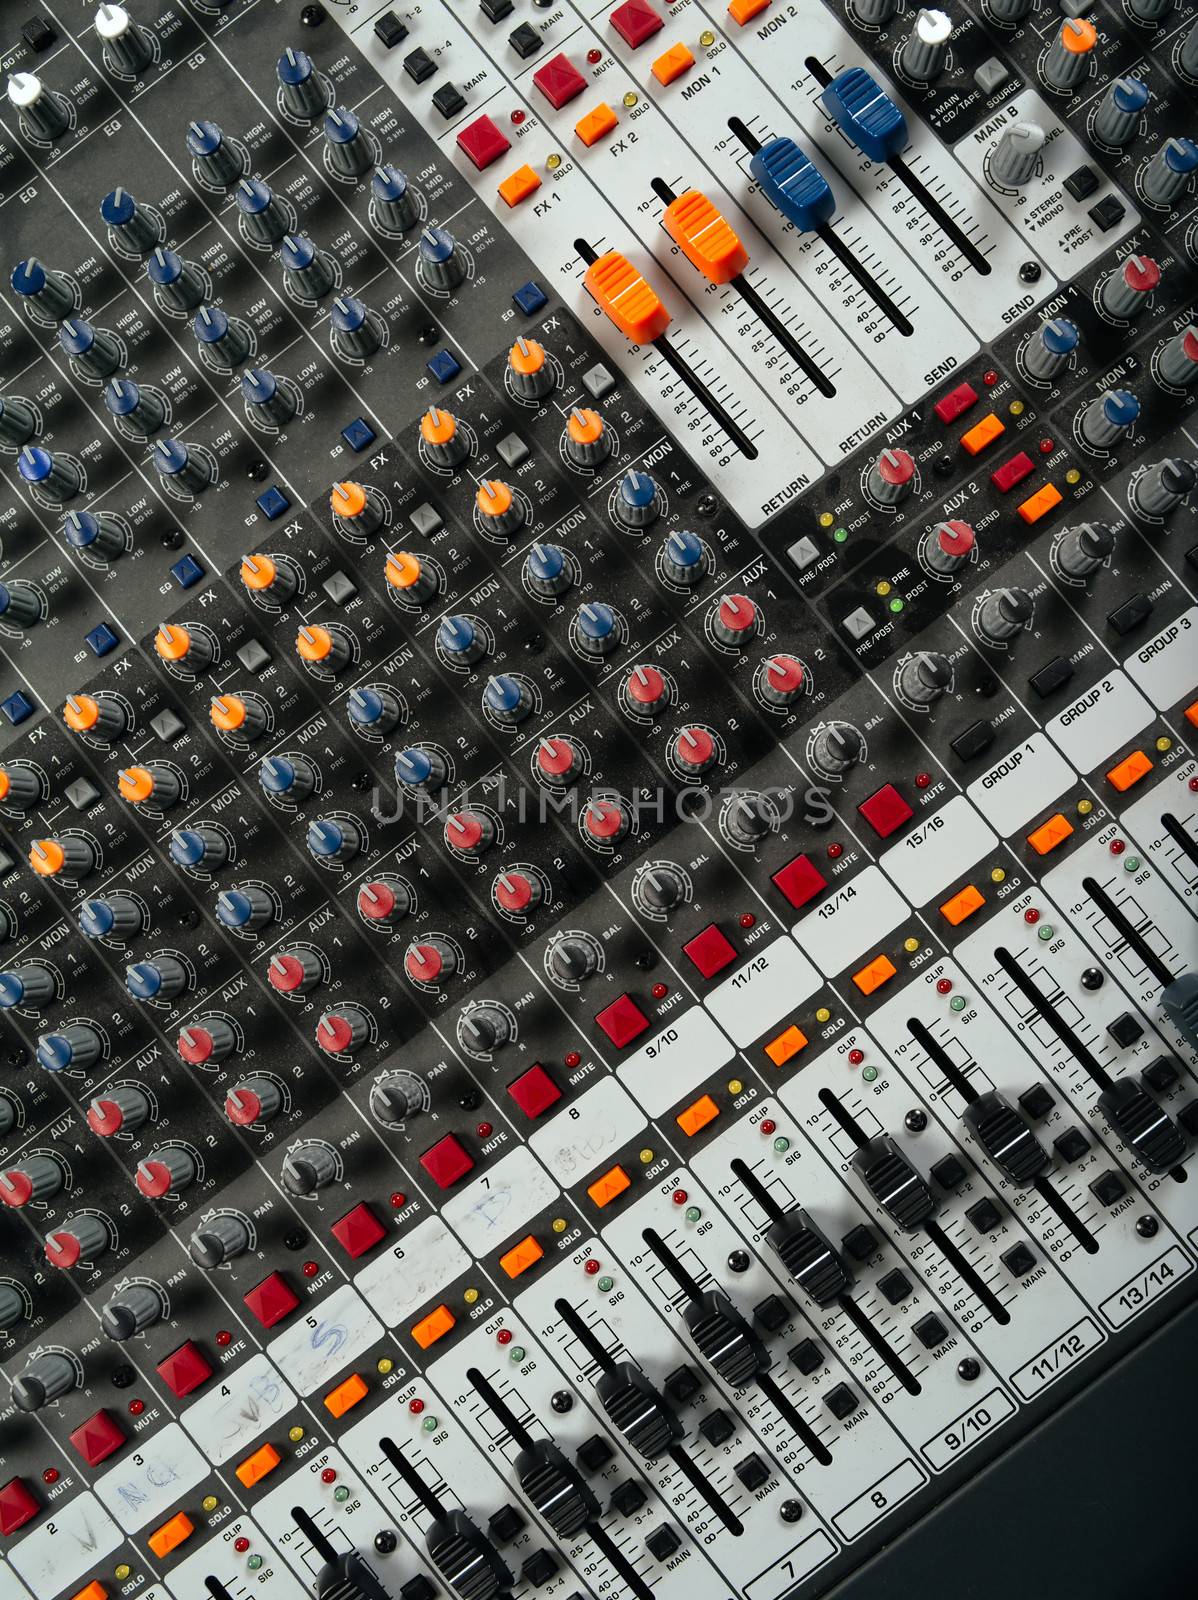 Recording studio mixing board by sumners